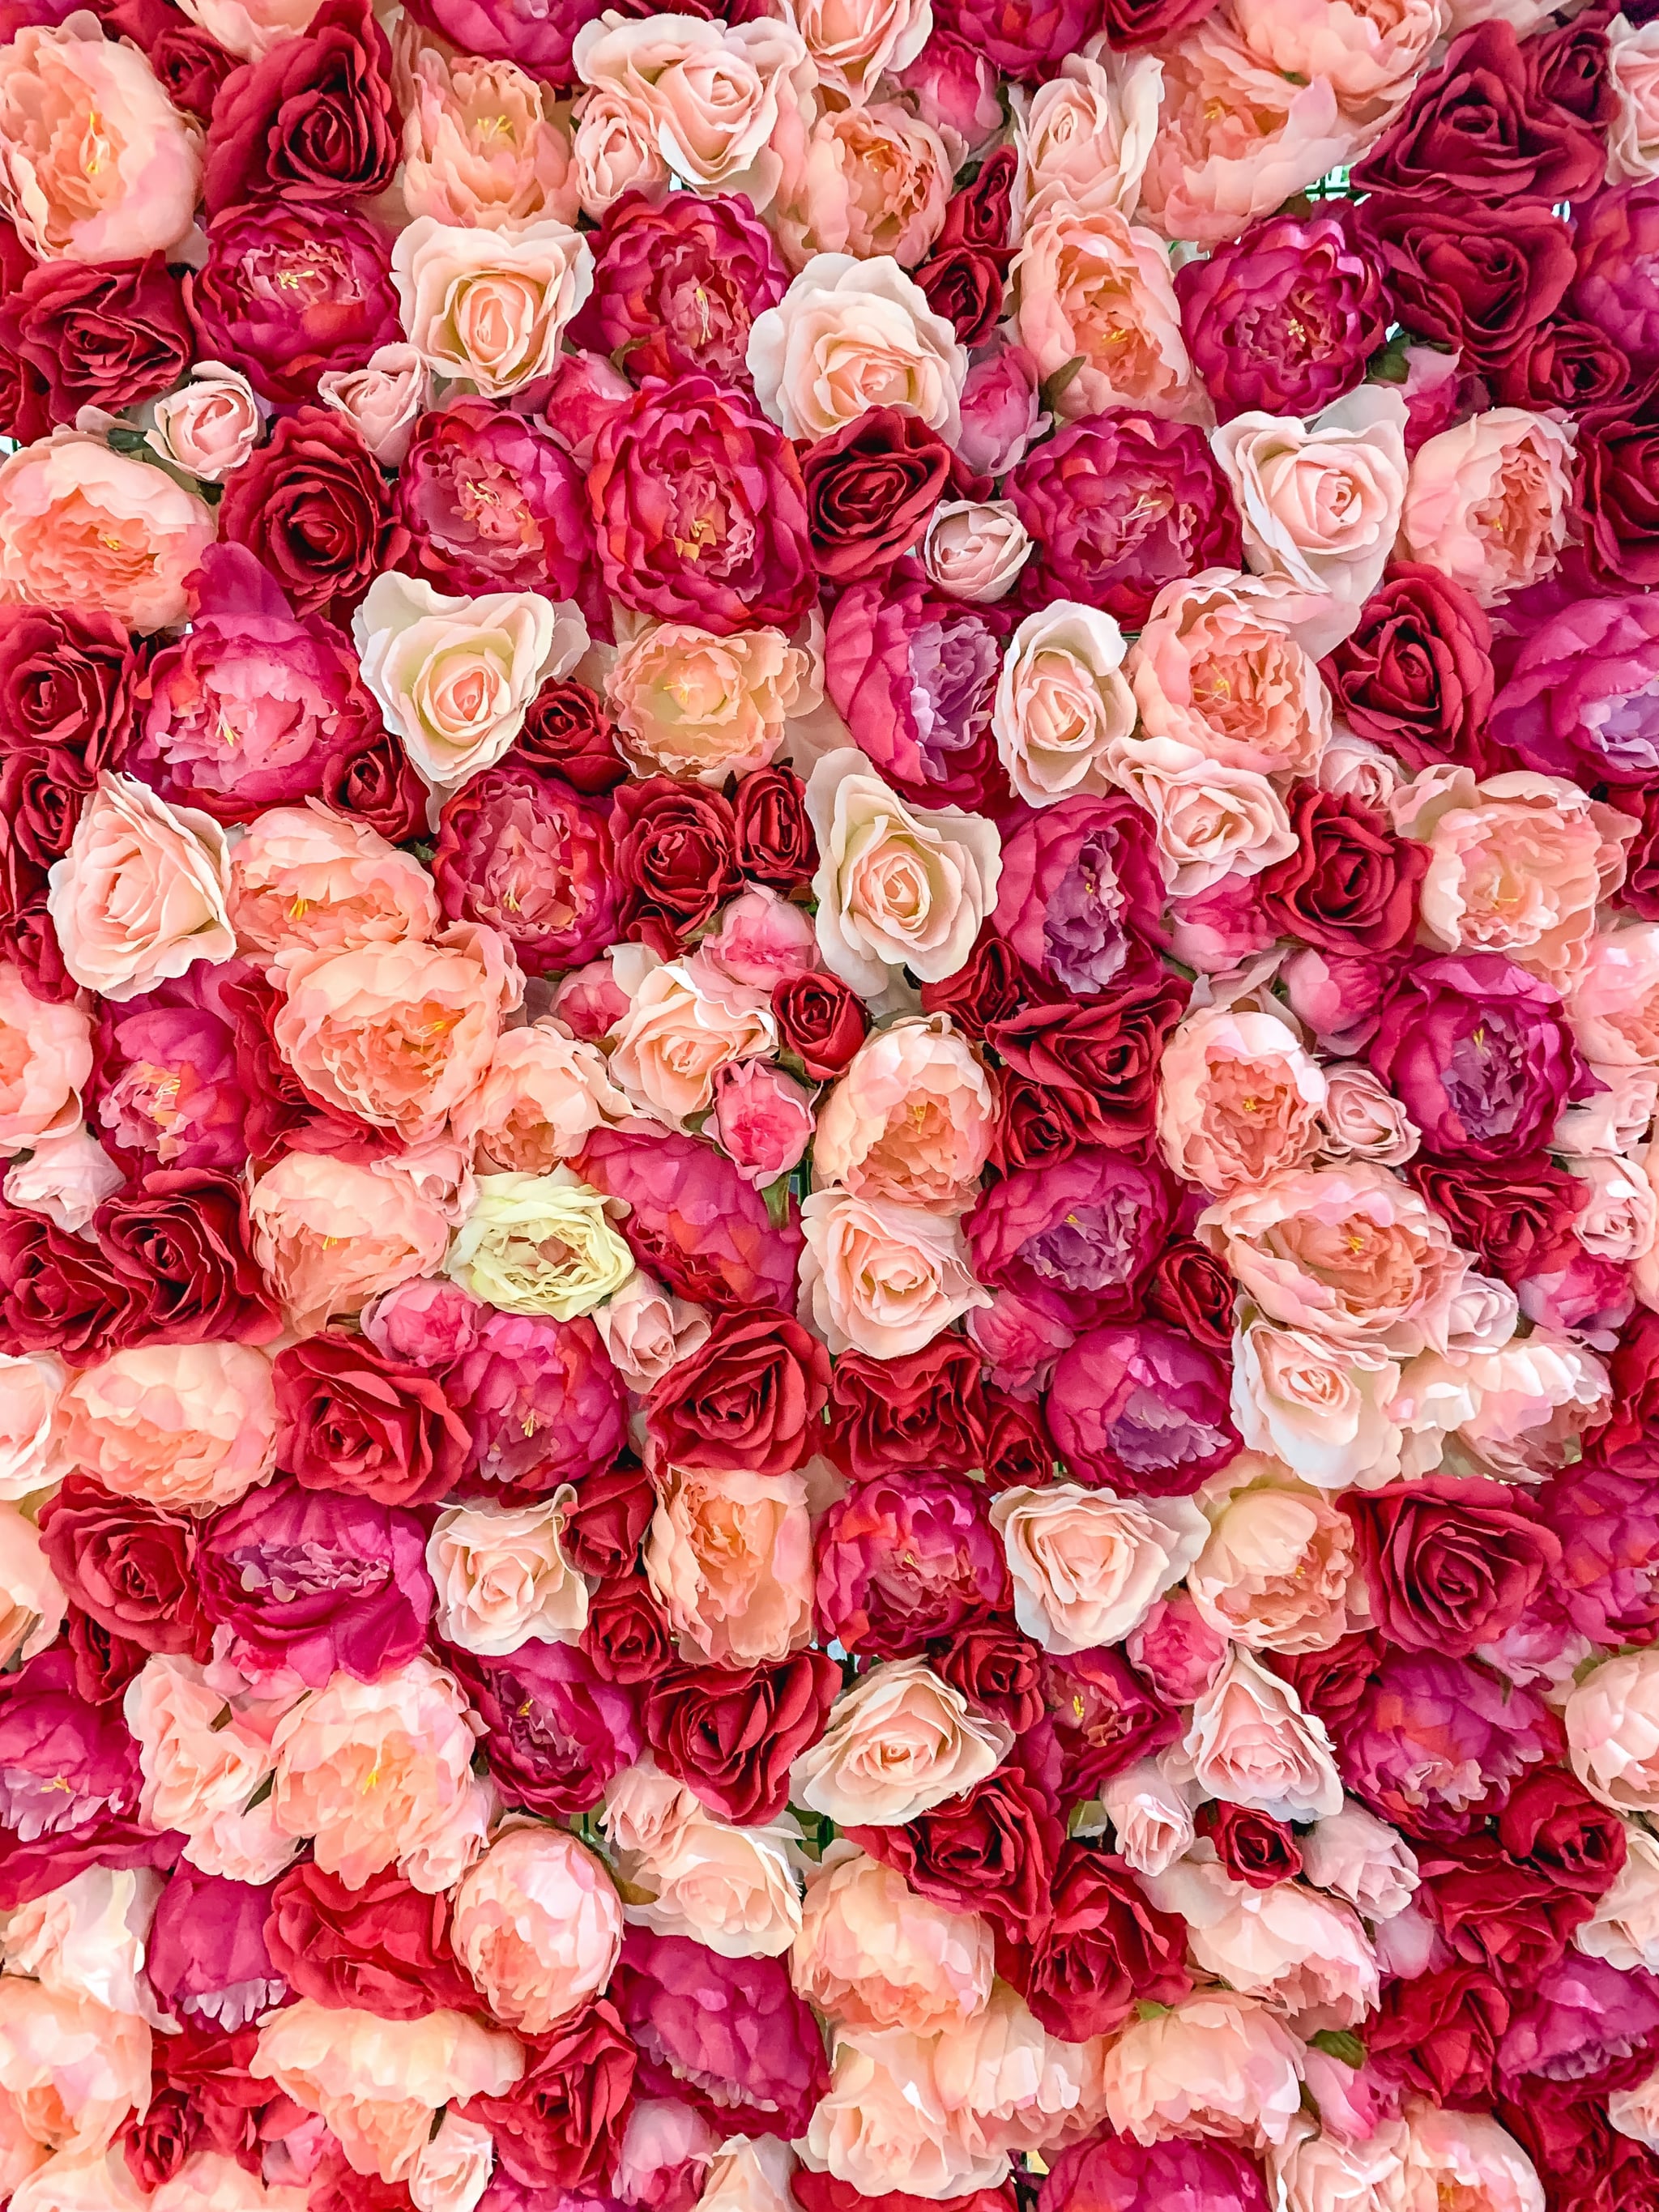 Valentine's Day Roses iPhone Wallpaper. The Most Romantic, Sweet, and Downright Dreamy iPhone Wallpaper For Valentine's Day